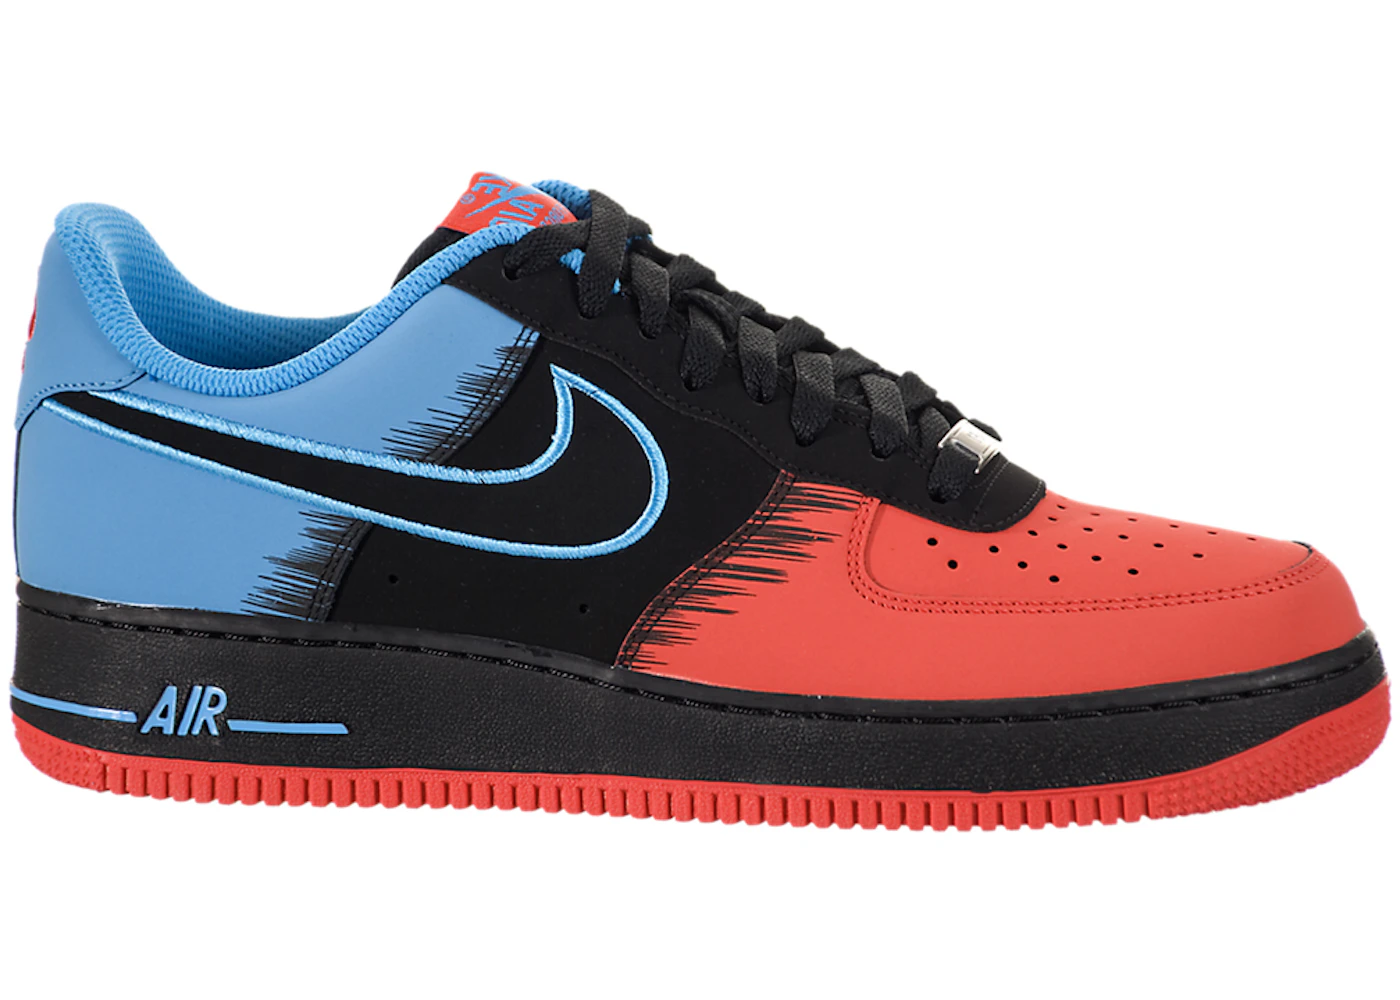 Nike Air Force 1 Low Spiderman: The Ultimate Sneaker for Marvel Fans